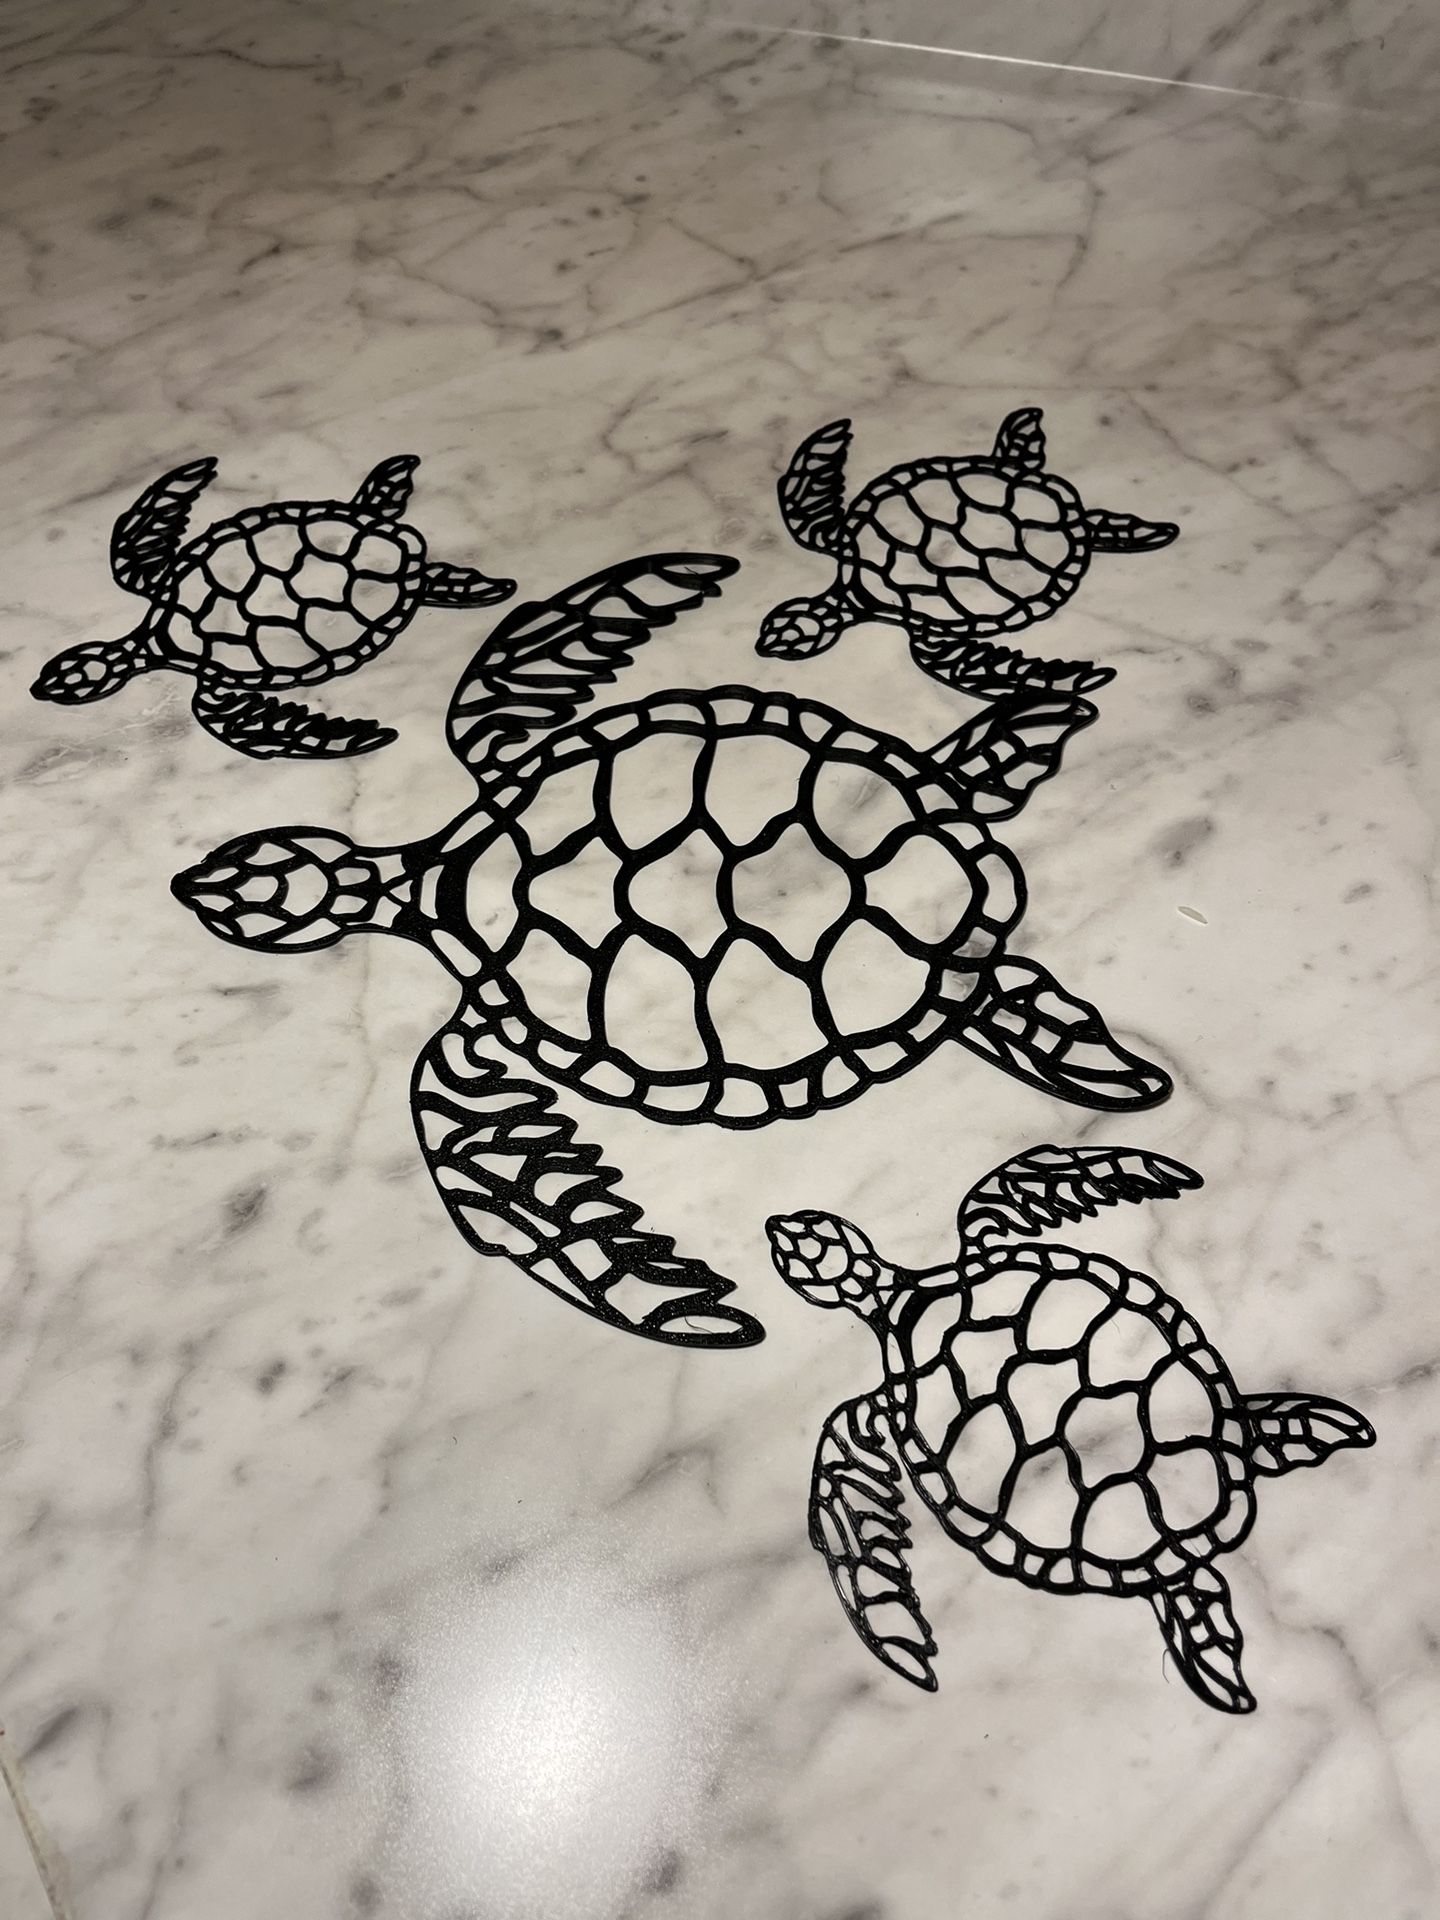 NEW Black Momma And Baby Sea Turtle Unique Wall Art Hone or office Decorations